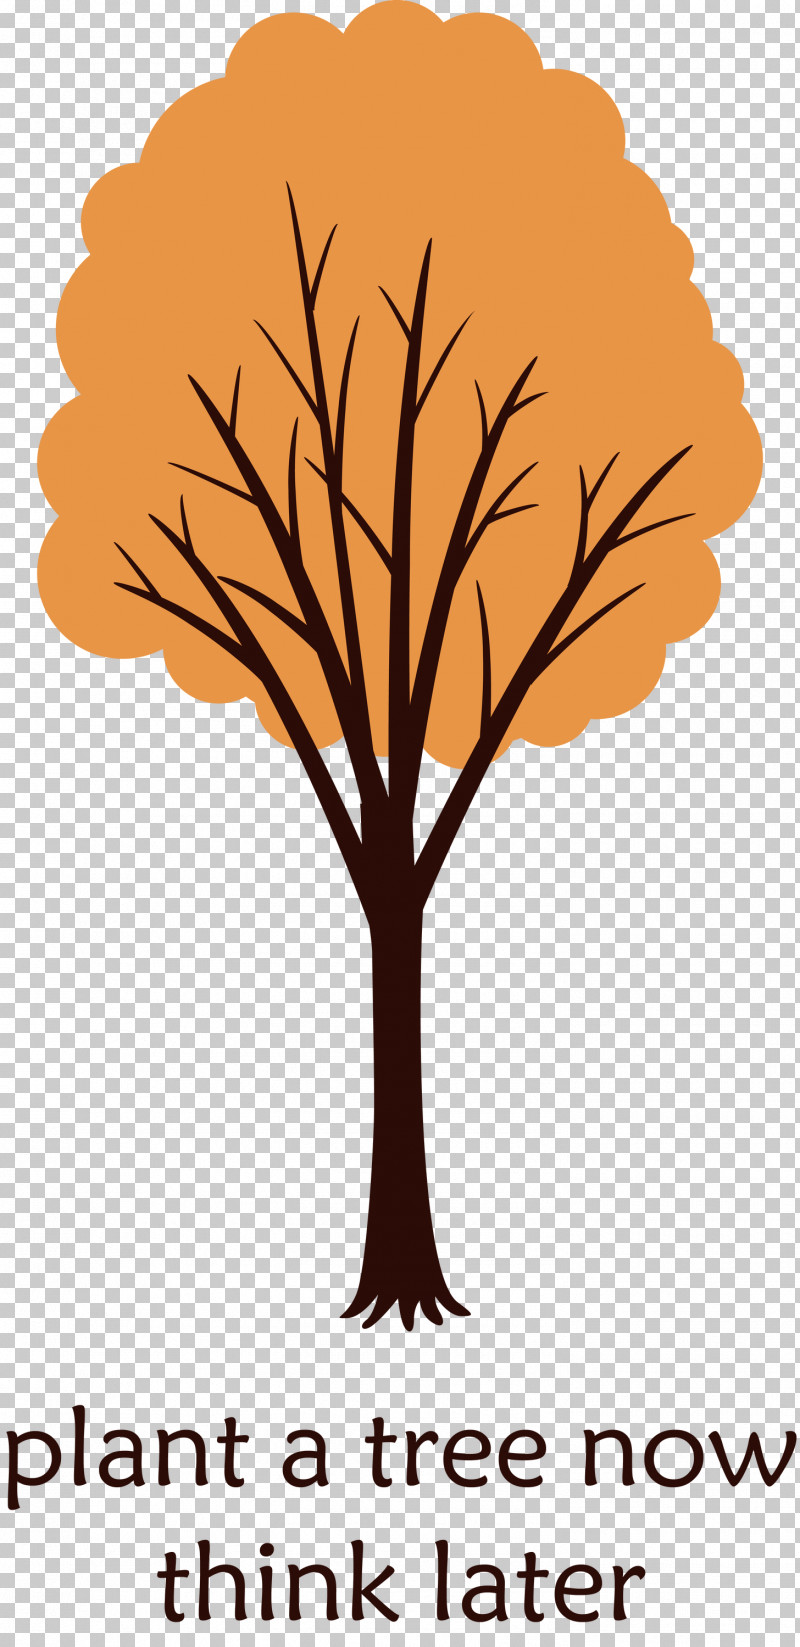 Plant A Tree Now Arbor Day Tree PNG, Clipart, Arbor Day, Blog, Destiny, Earthly Branches, Four Pillars Of Destiny Free PNG Download